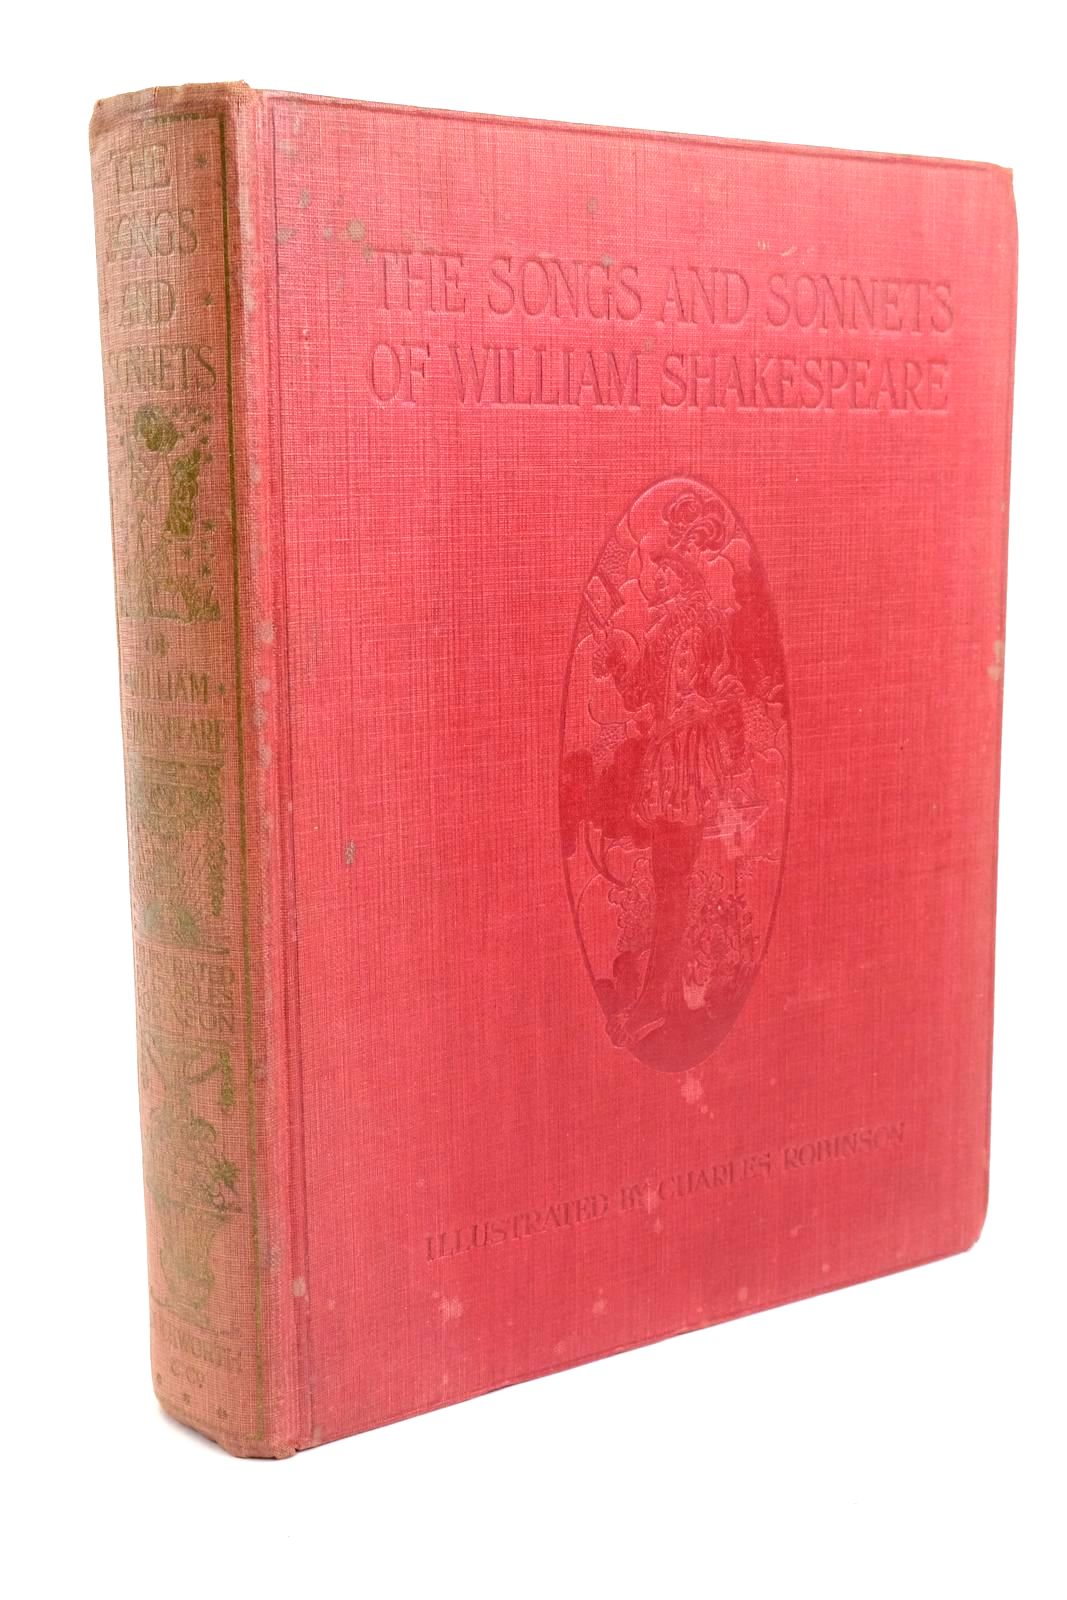 Photo of THE SONGS AND SONNETS OF WILLIAM SHAKESPEARE- Stock Number: 1322269